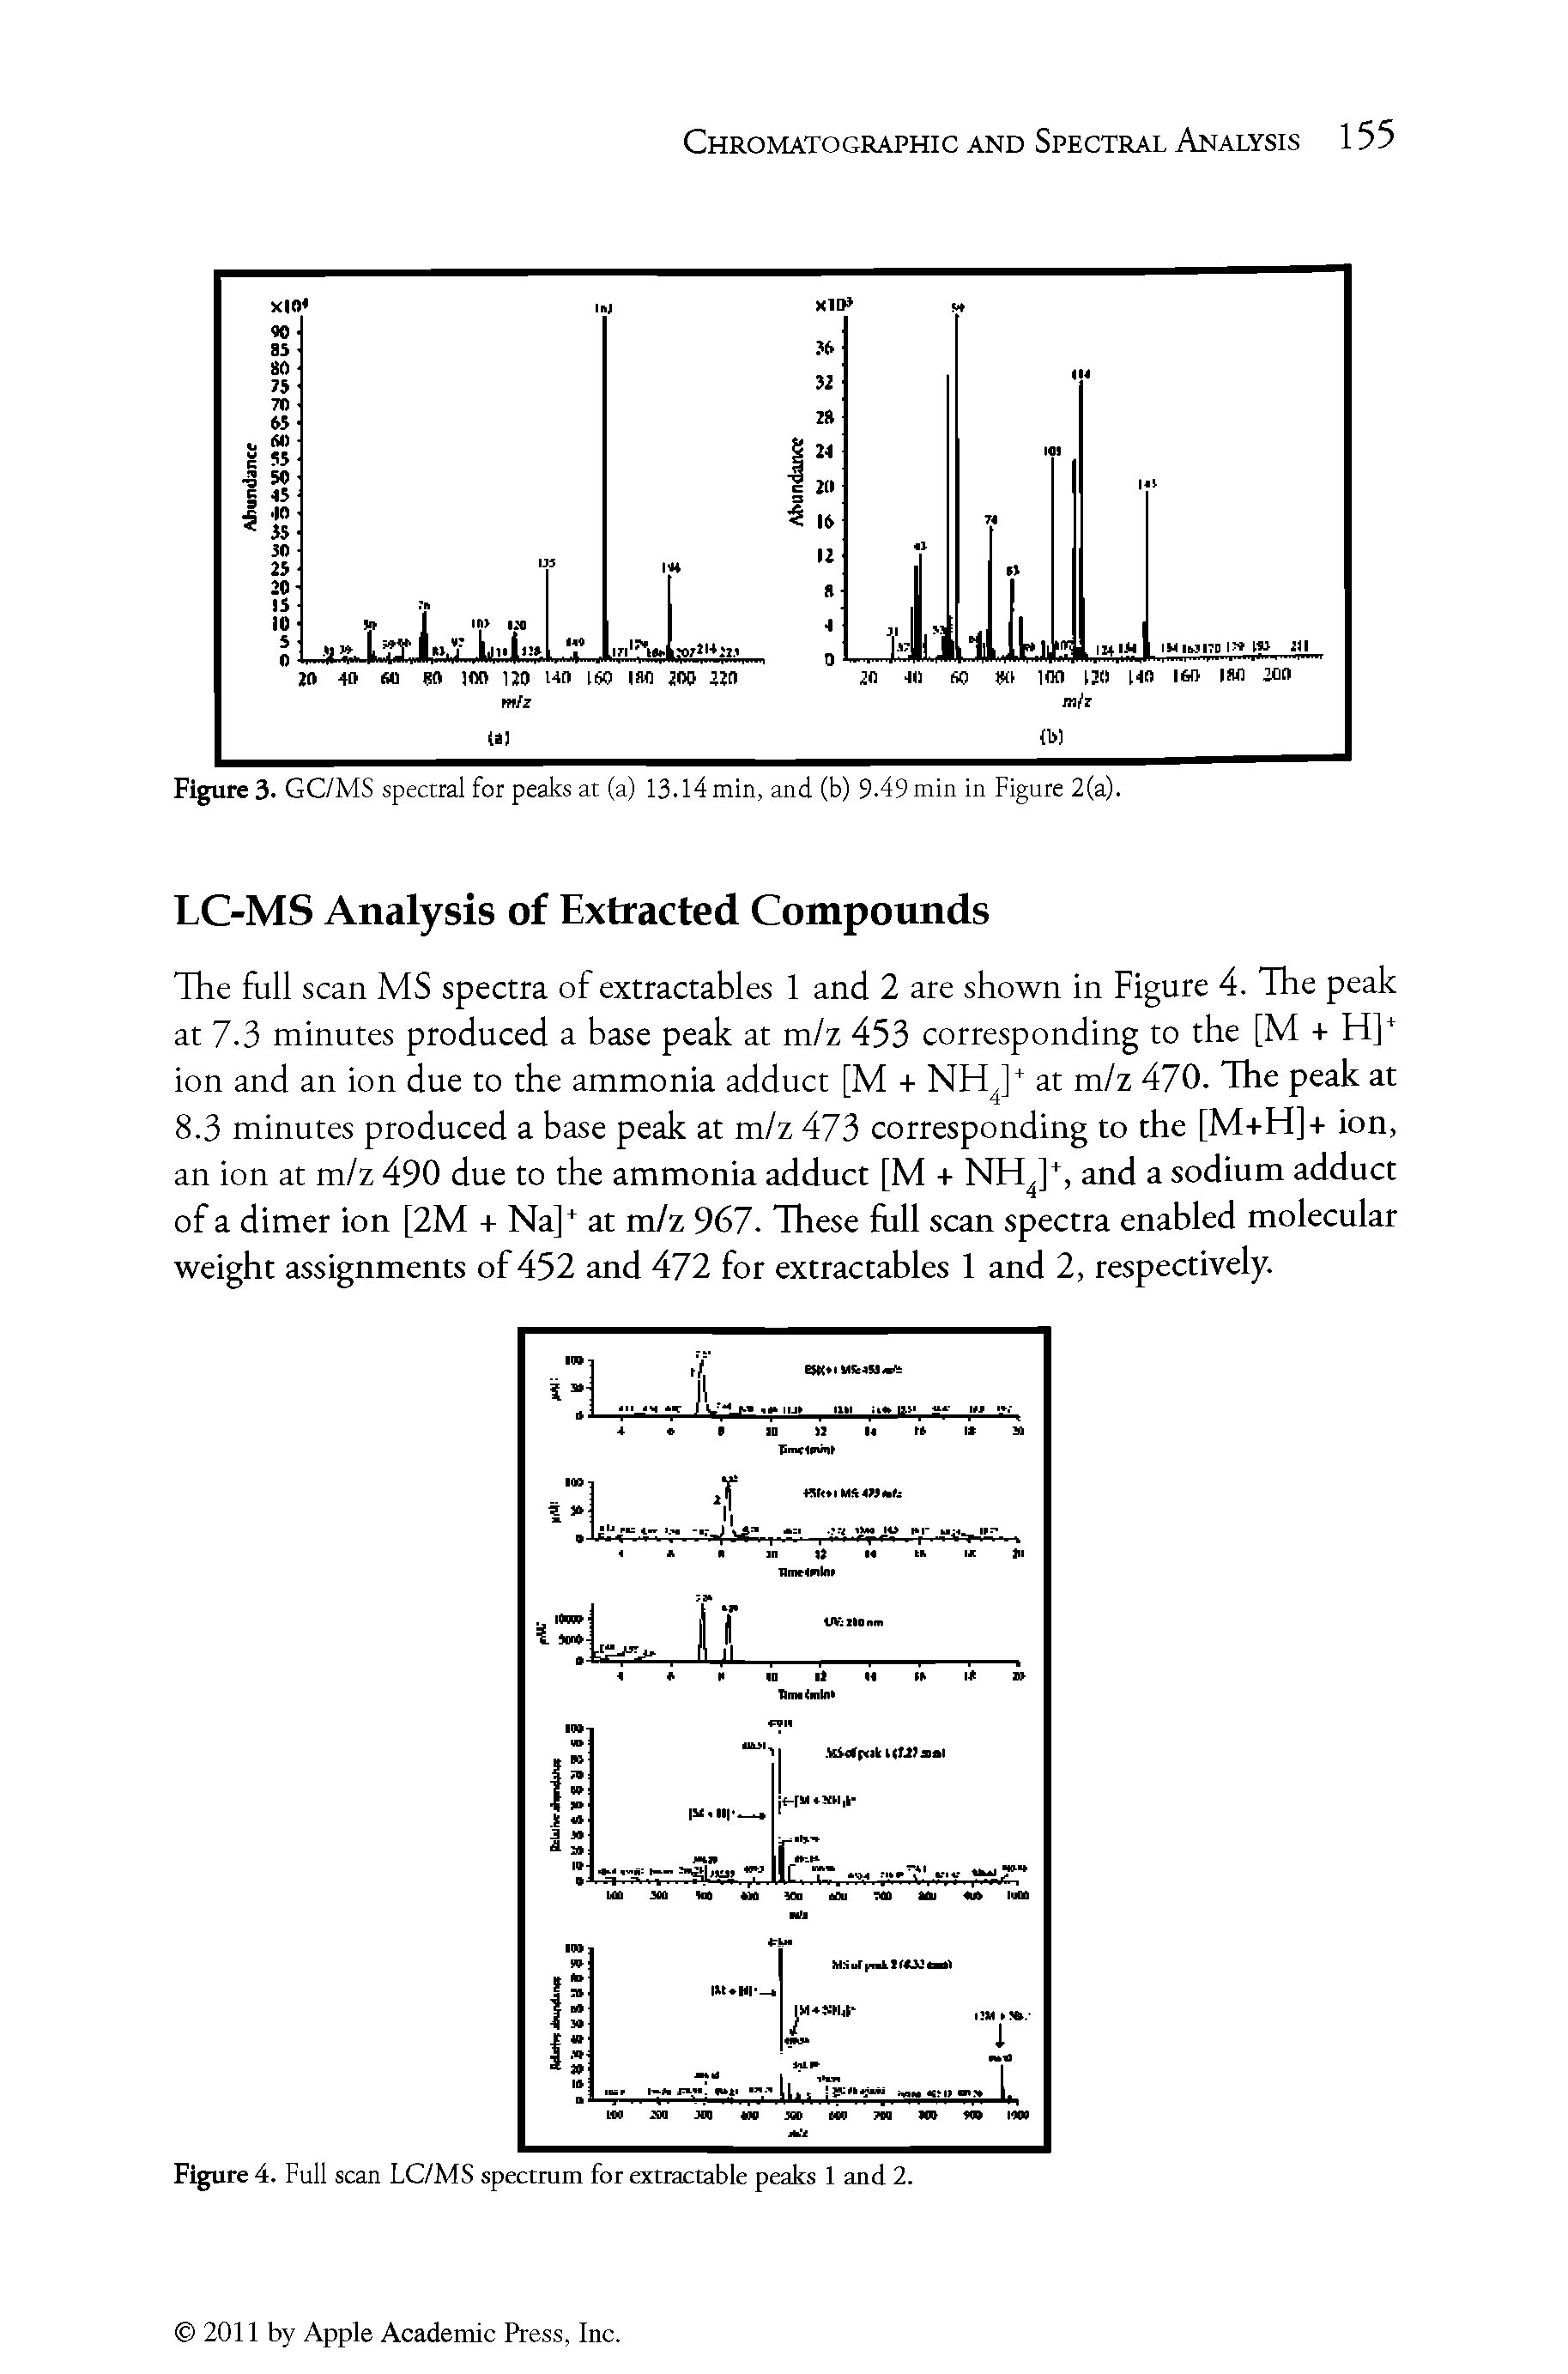 Figure 4. Full scan LC/MS spectrum for extractable peaks 1 and 2.